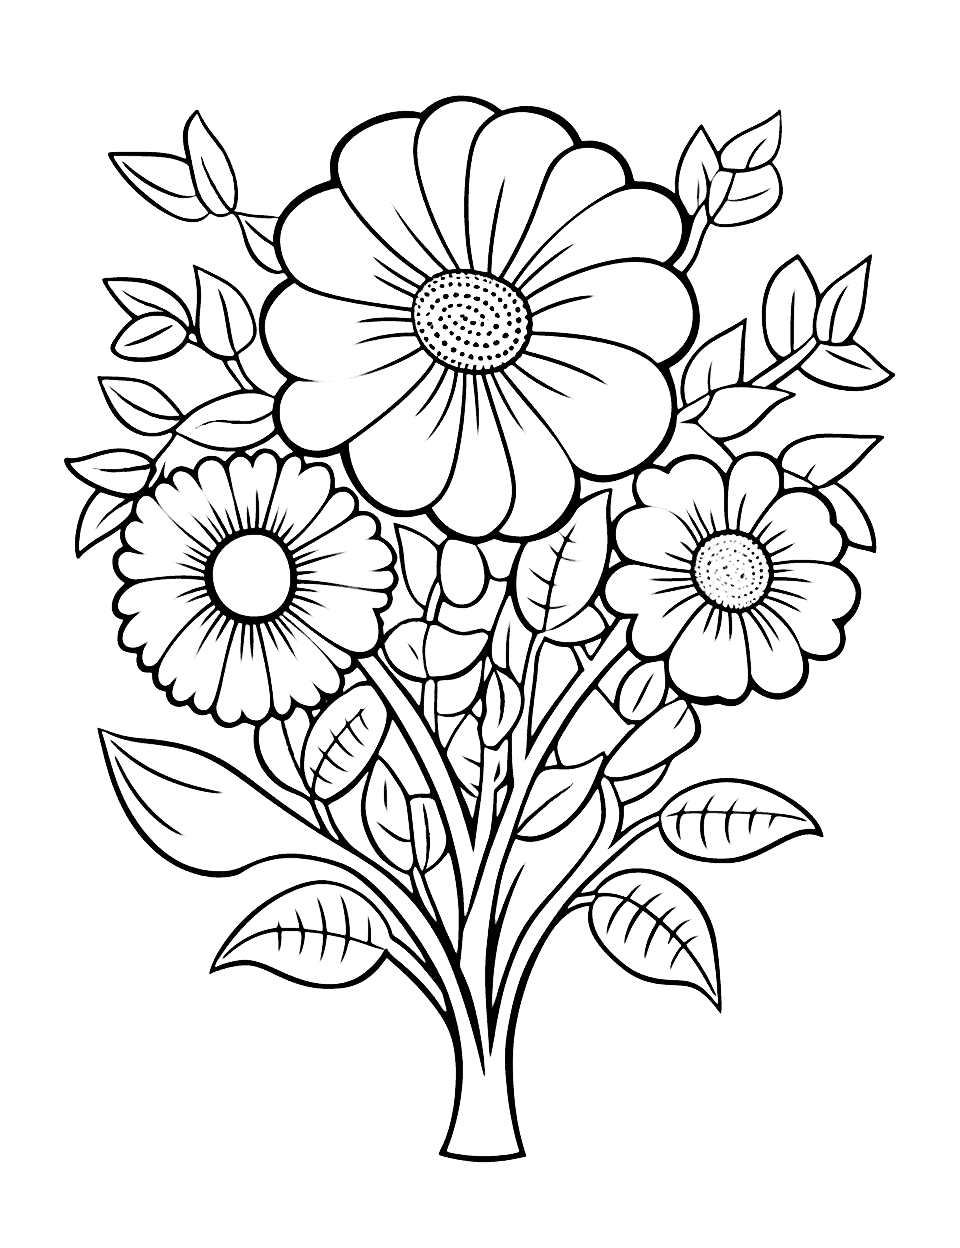 Heart-Shaped Spring Flowers Flower Coloring Page - A coloring page featuring a heart shape filled with spring flowers.